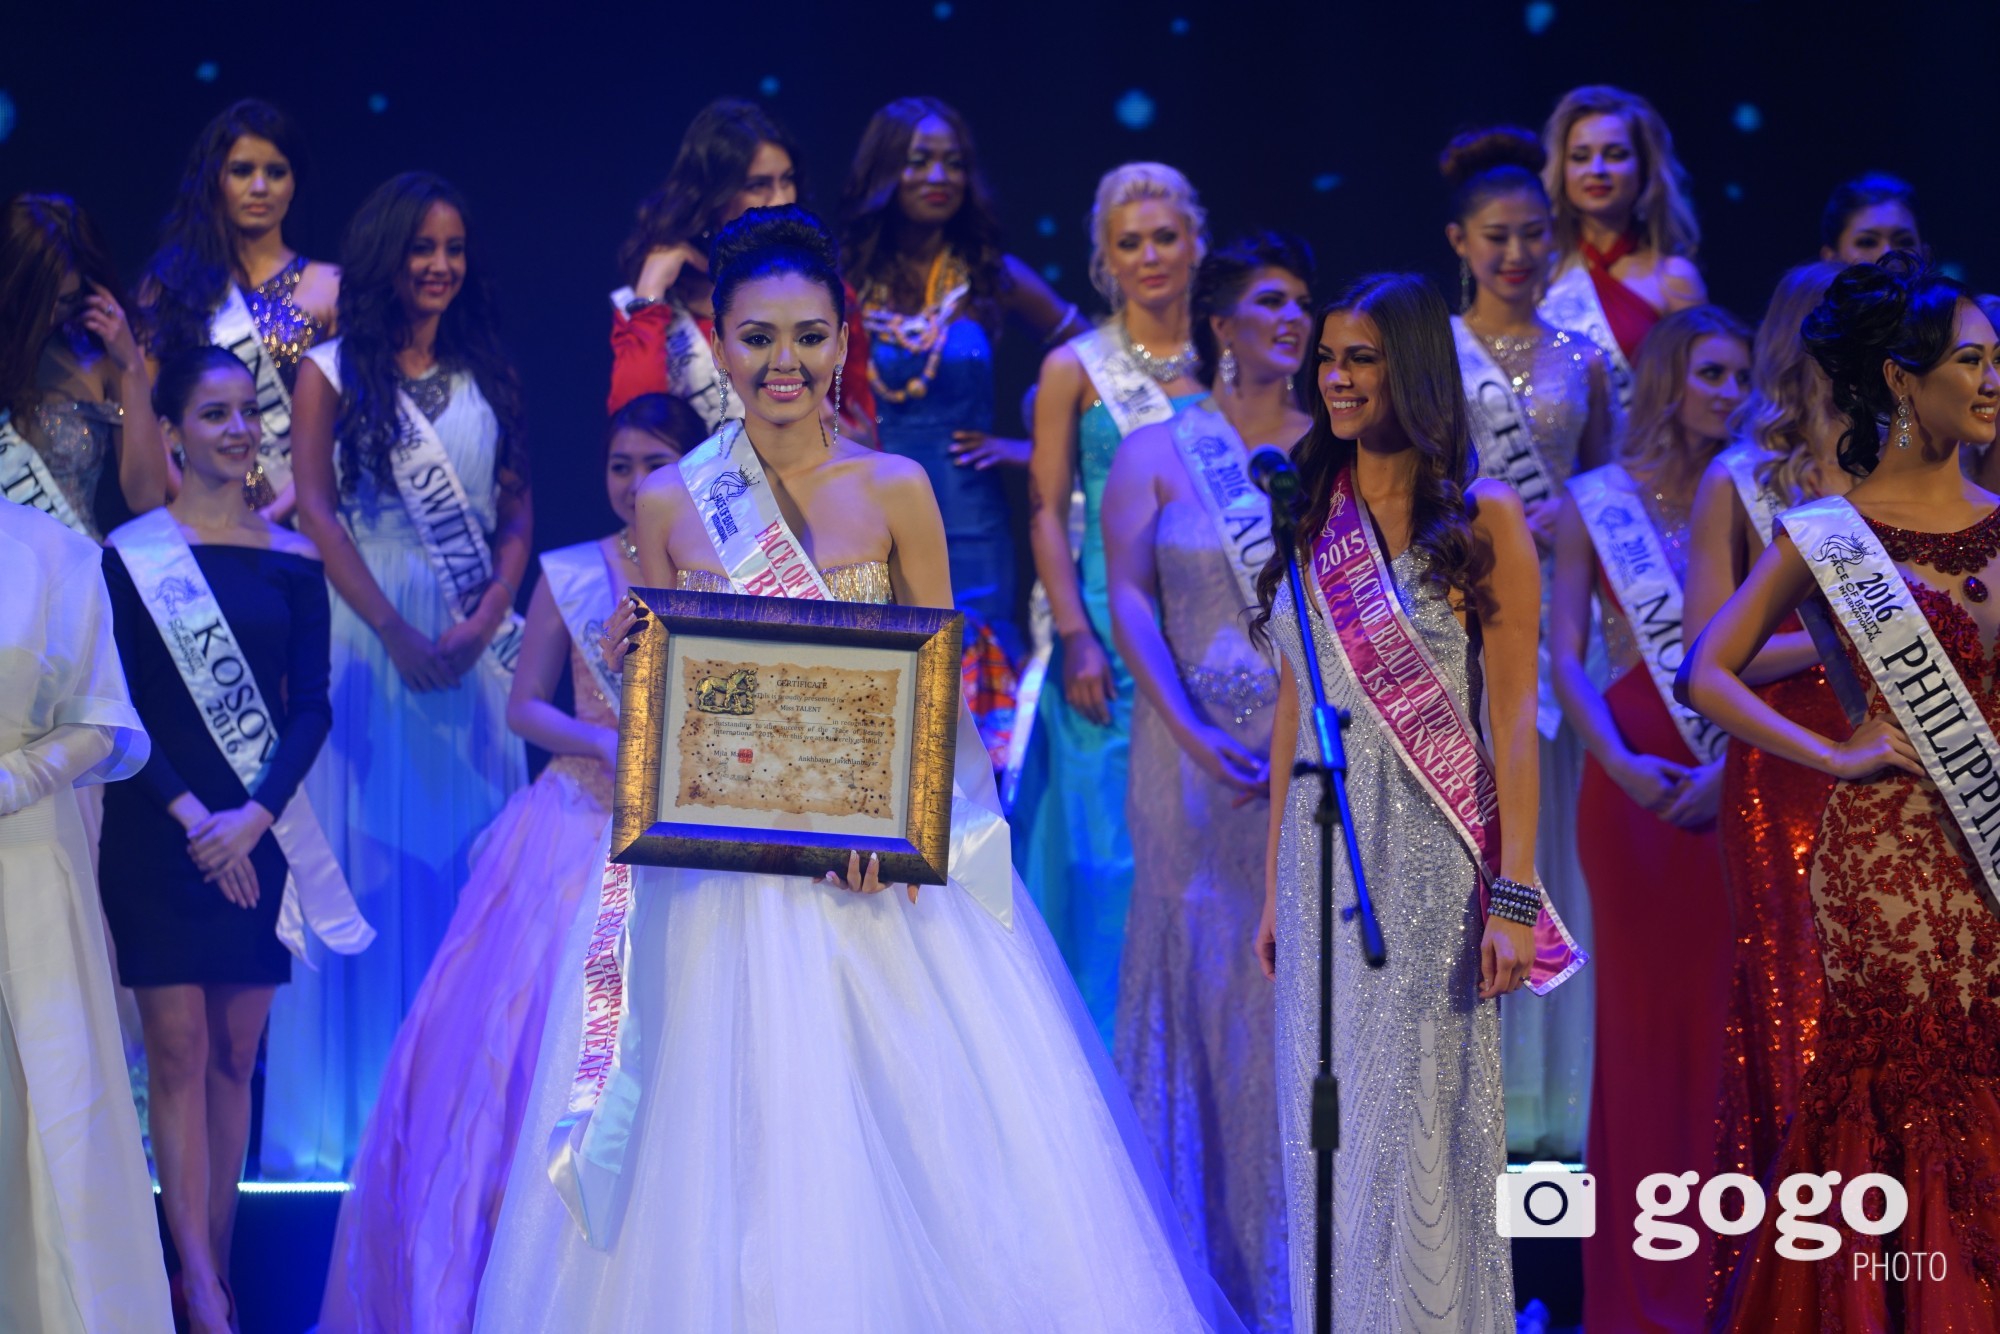 Miss Talent award goes to Miss Mongolia